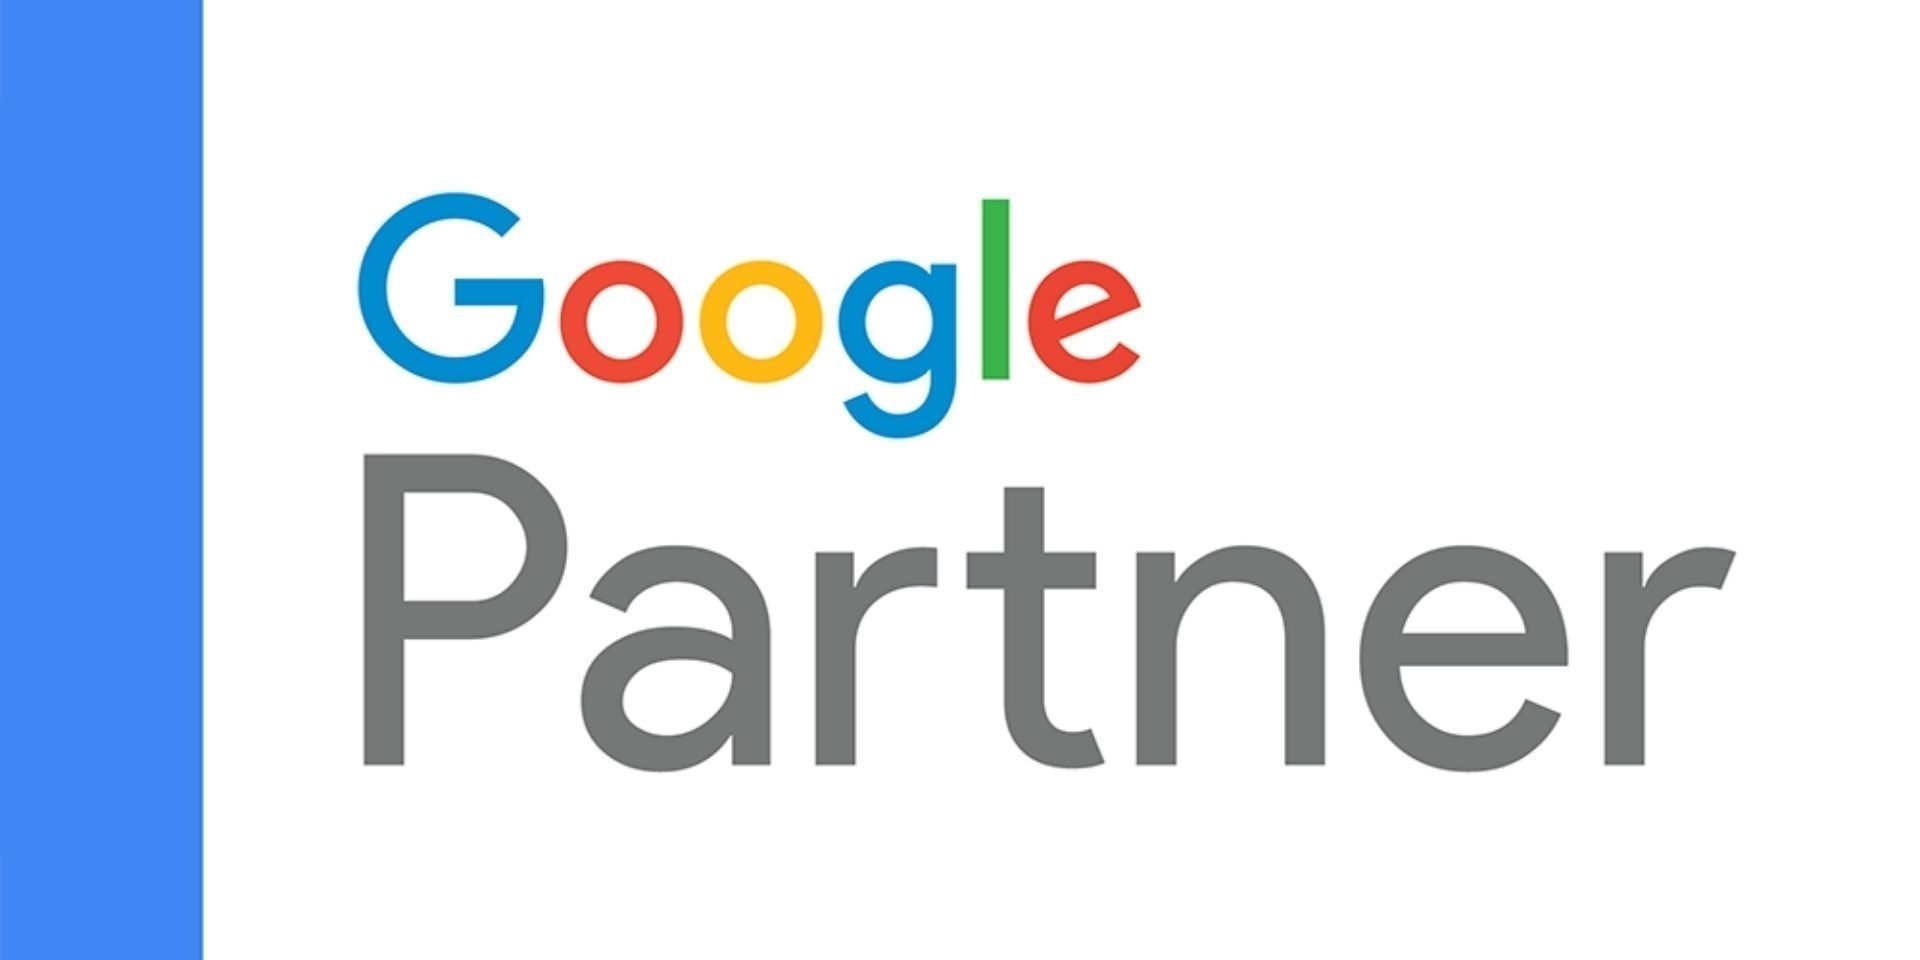 A google partner logo on a white background with a blue border.